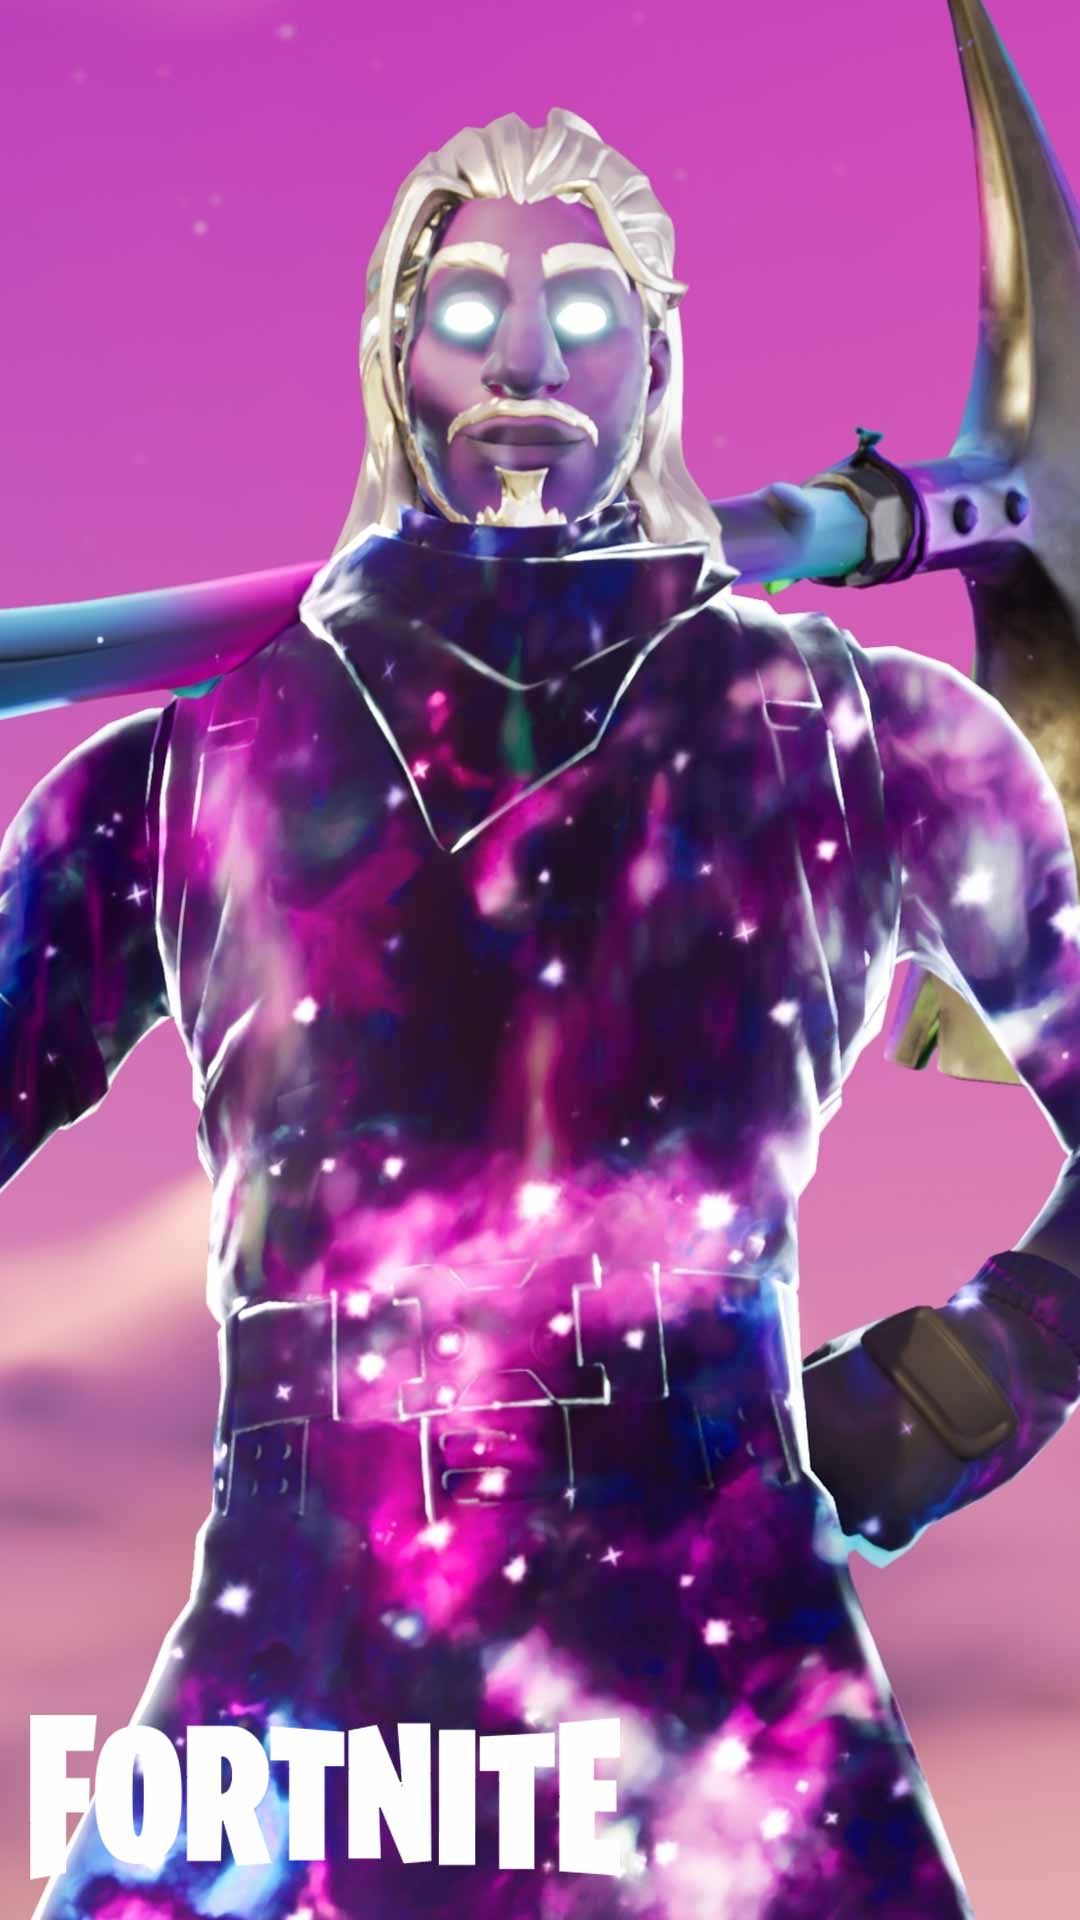 Fortnite wallpaper HD phone background for iPhone android lock screen. Characters Skins art. HD phone background, iPhone background, Phone background